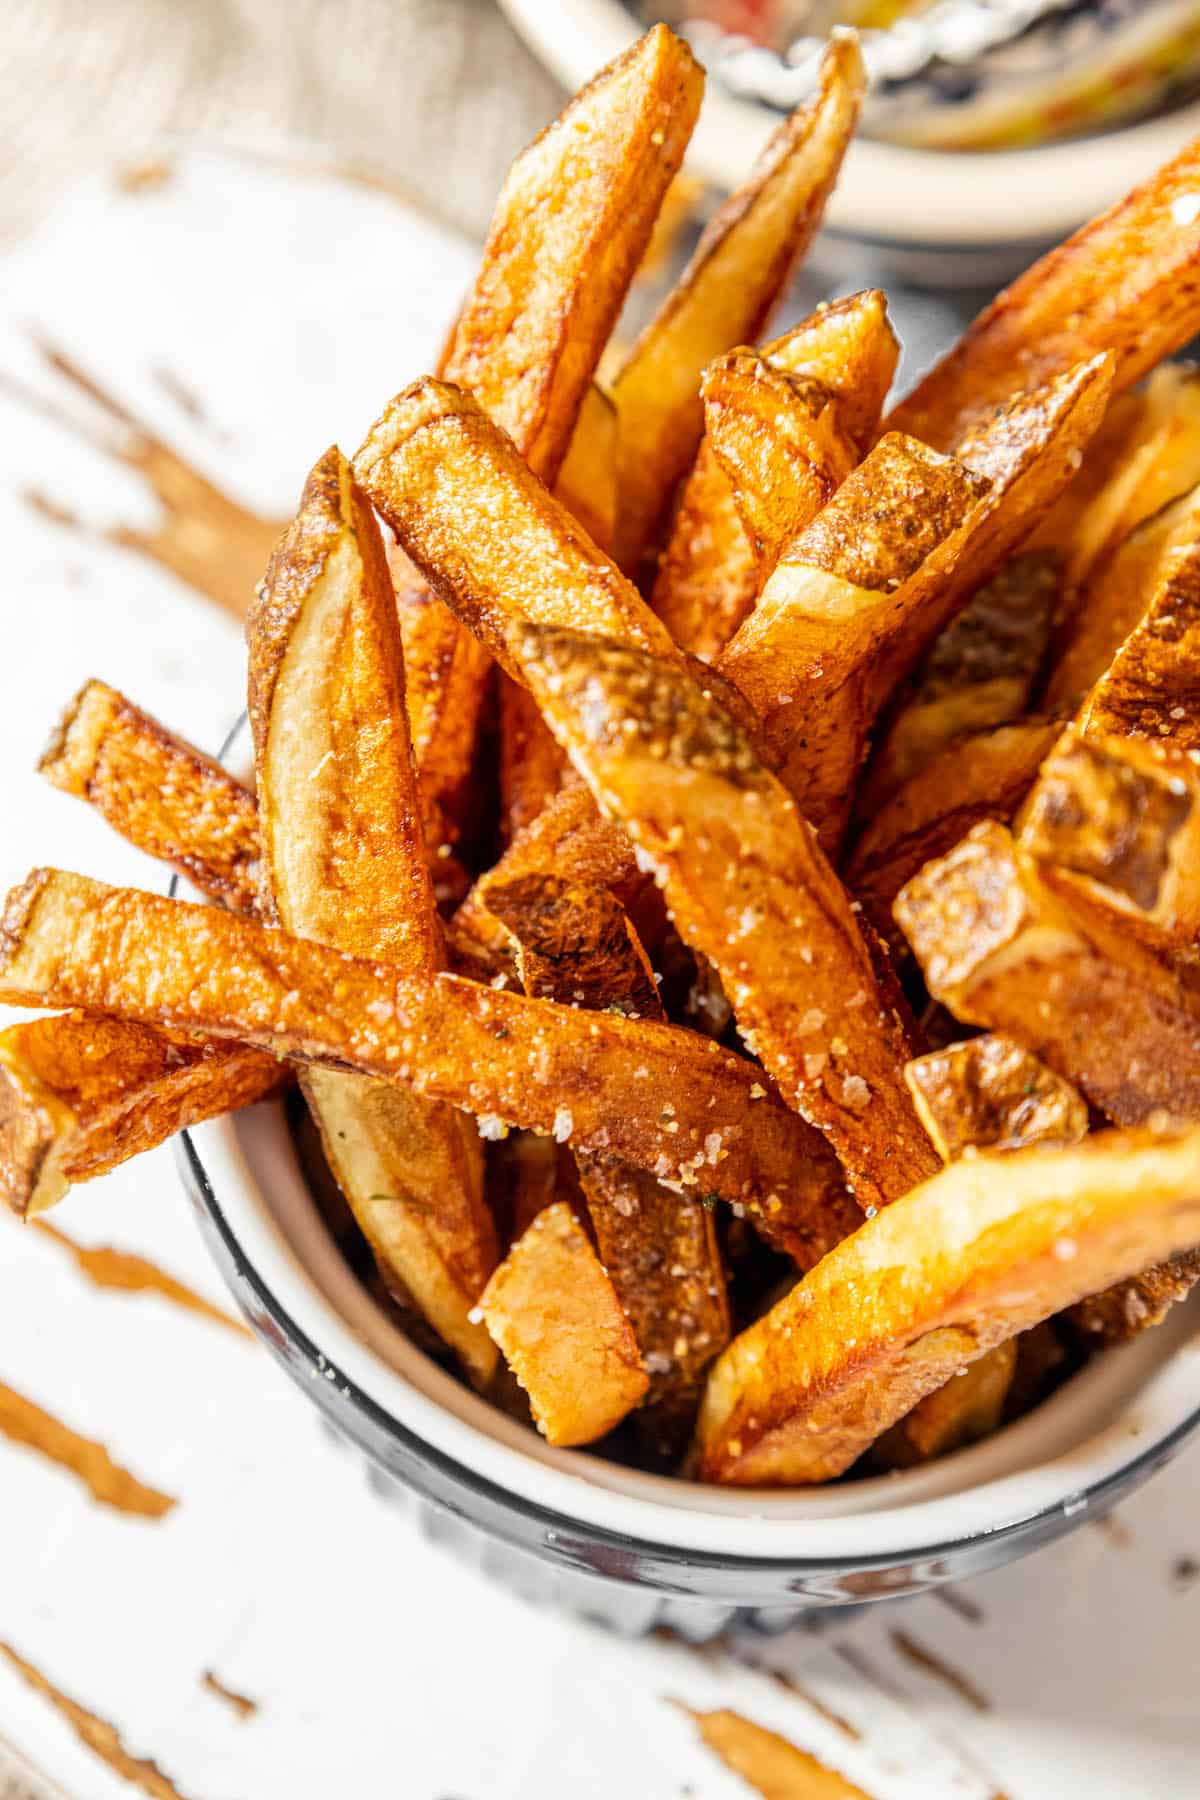 Crispy sweet potato fries served in a bowl on a table.